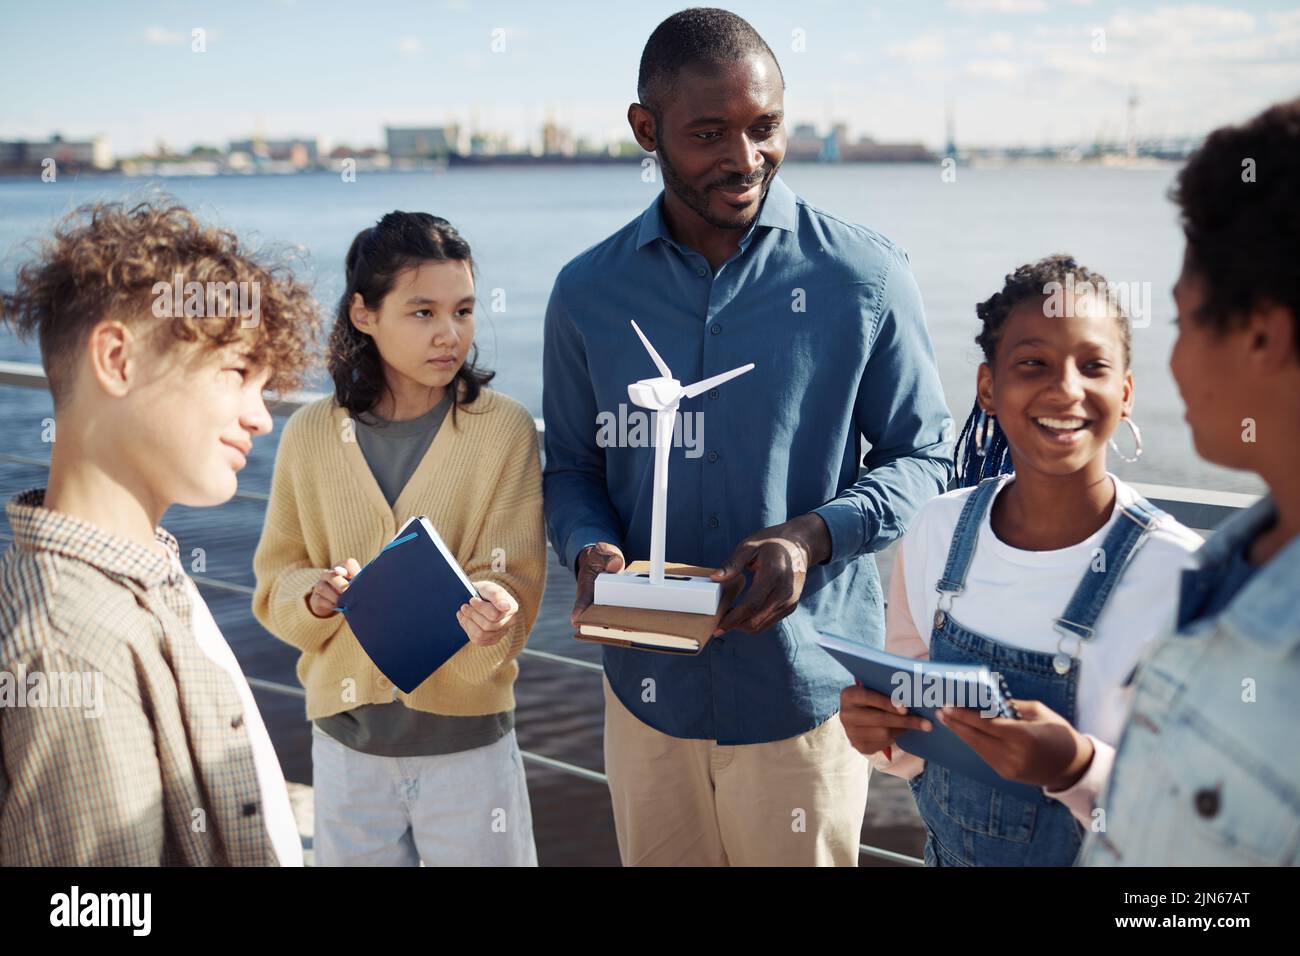 Portrait of black male teacher demonstrating wind mill model to group of kids during outdoor class in sunlight Stock Photo